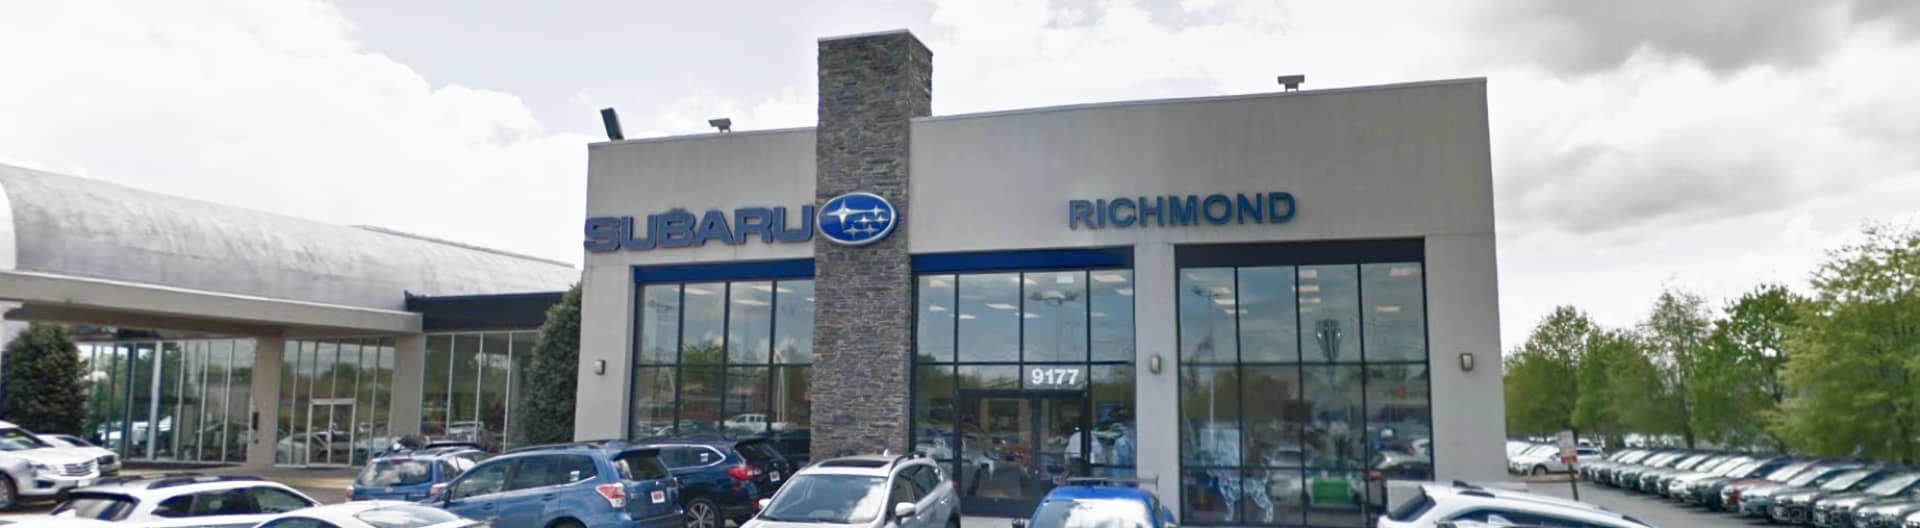 An exterior view of the top of Moore Subaru Dealership Richmond Building